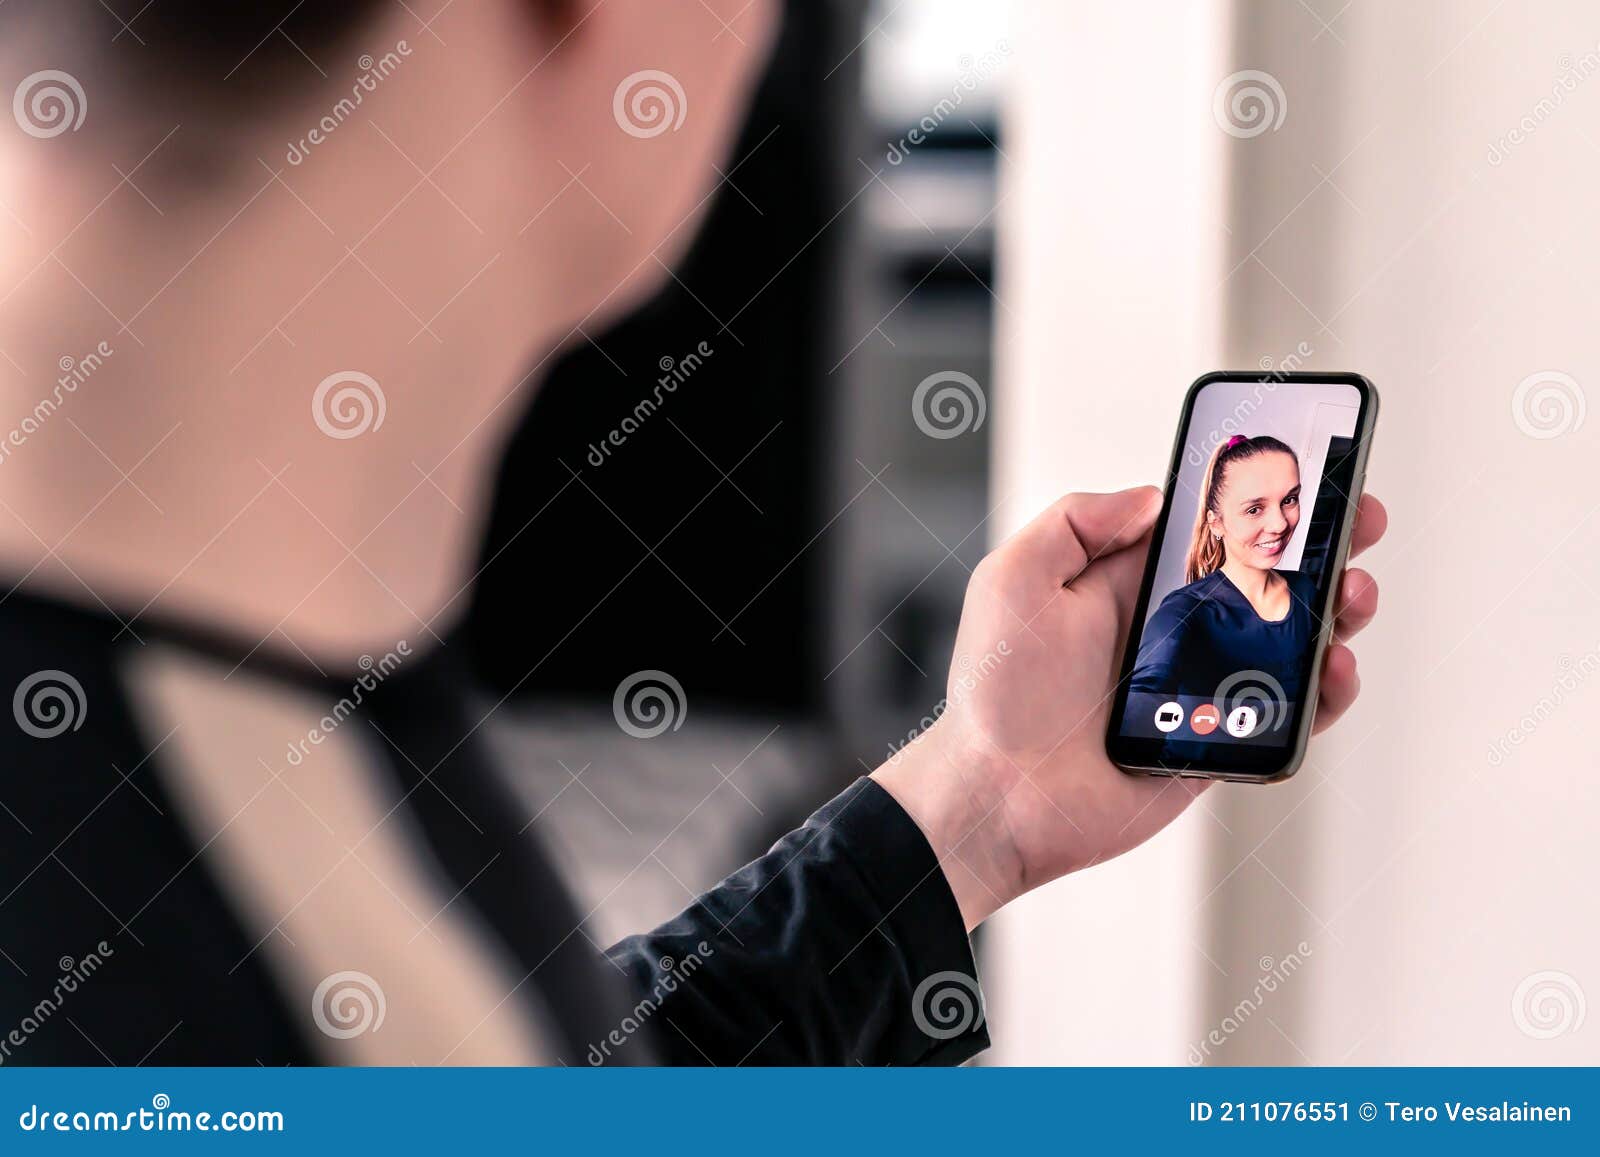 Online mobile video chat